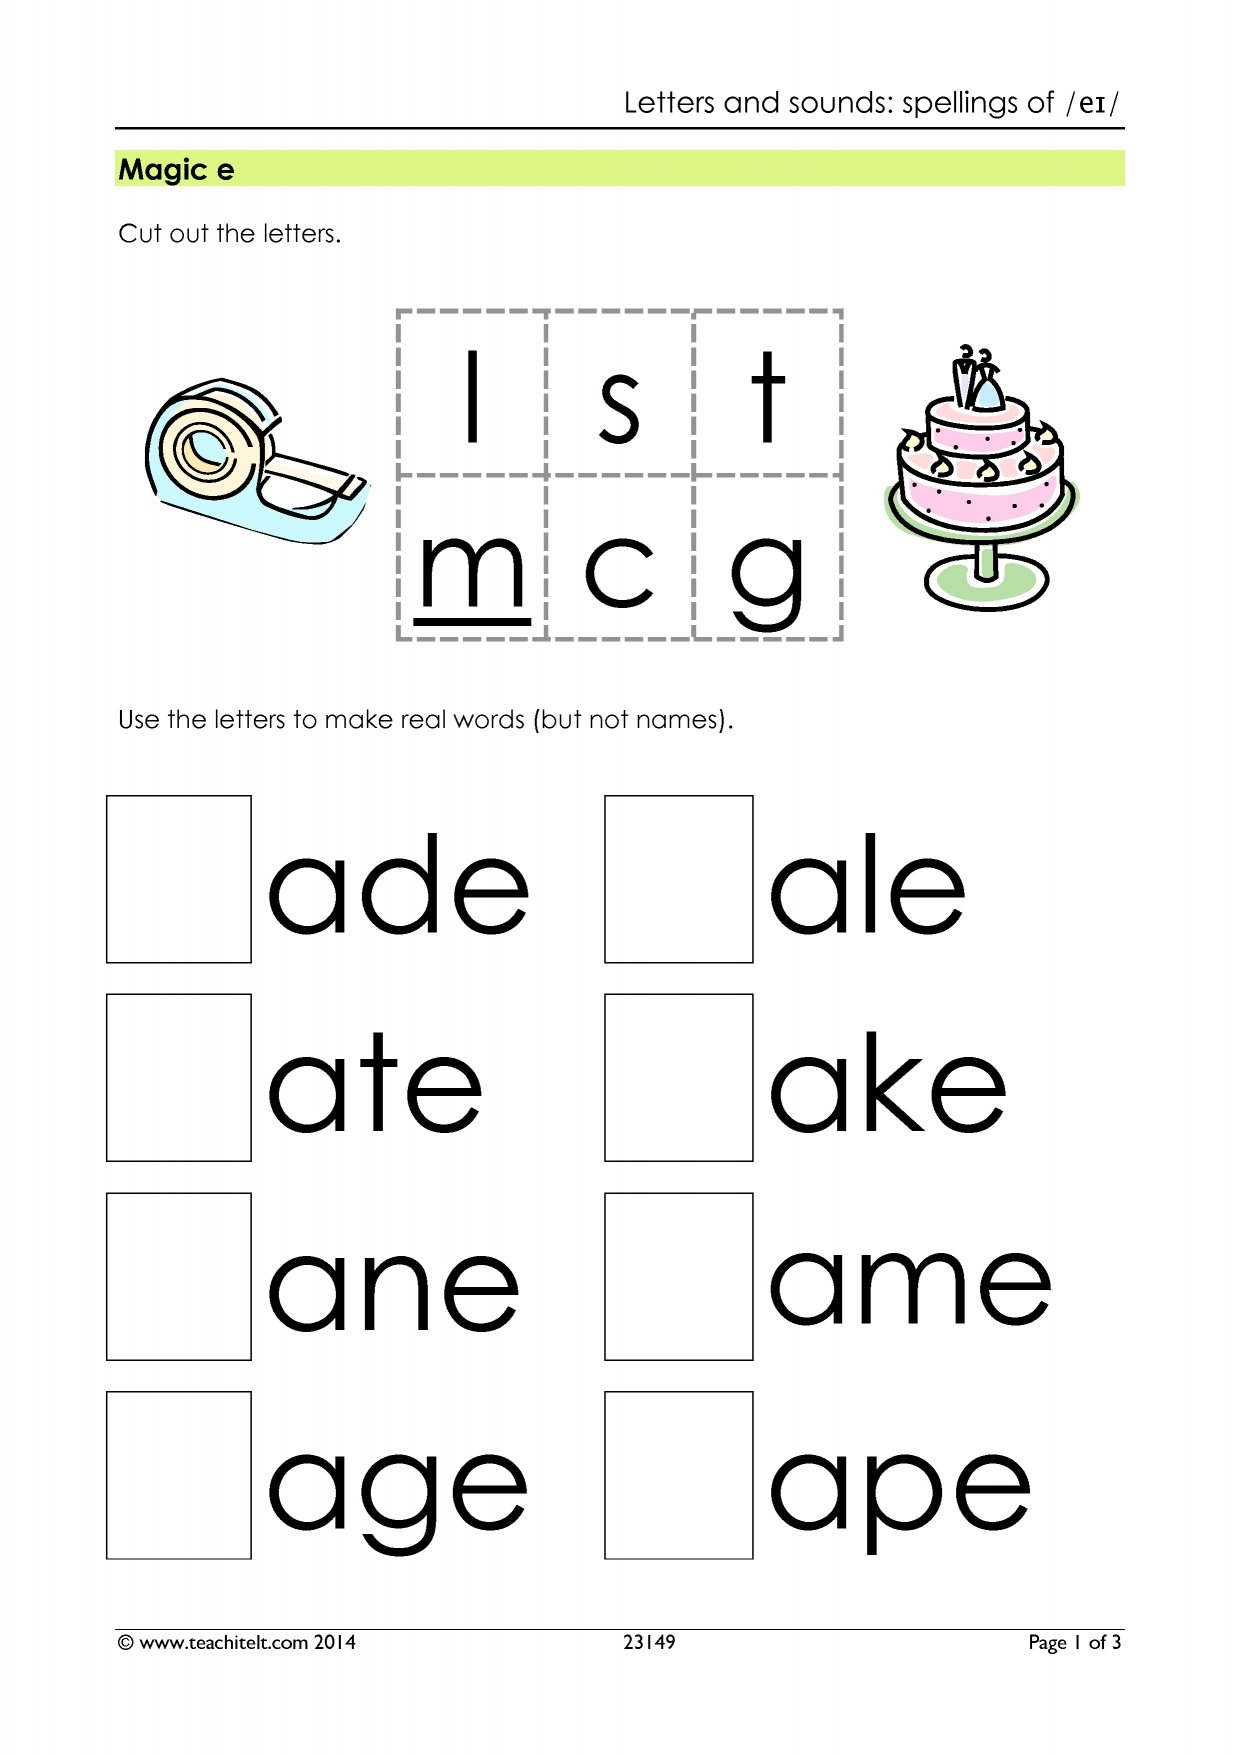 Letters and sounds: spellings of /eɪ/ - Spelling